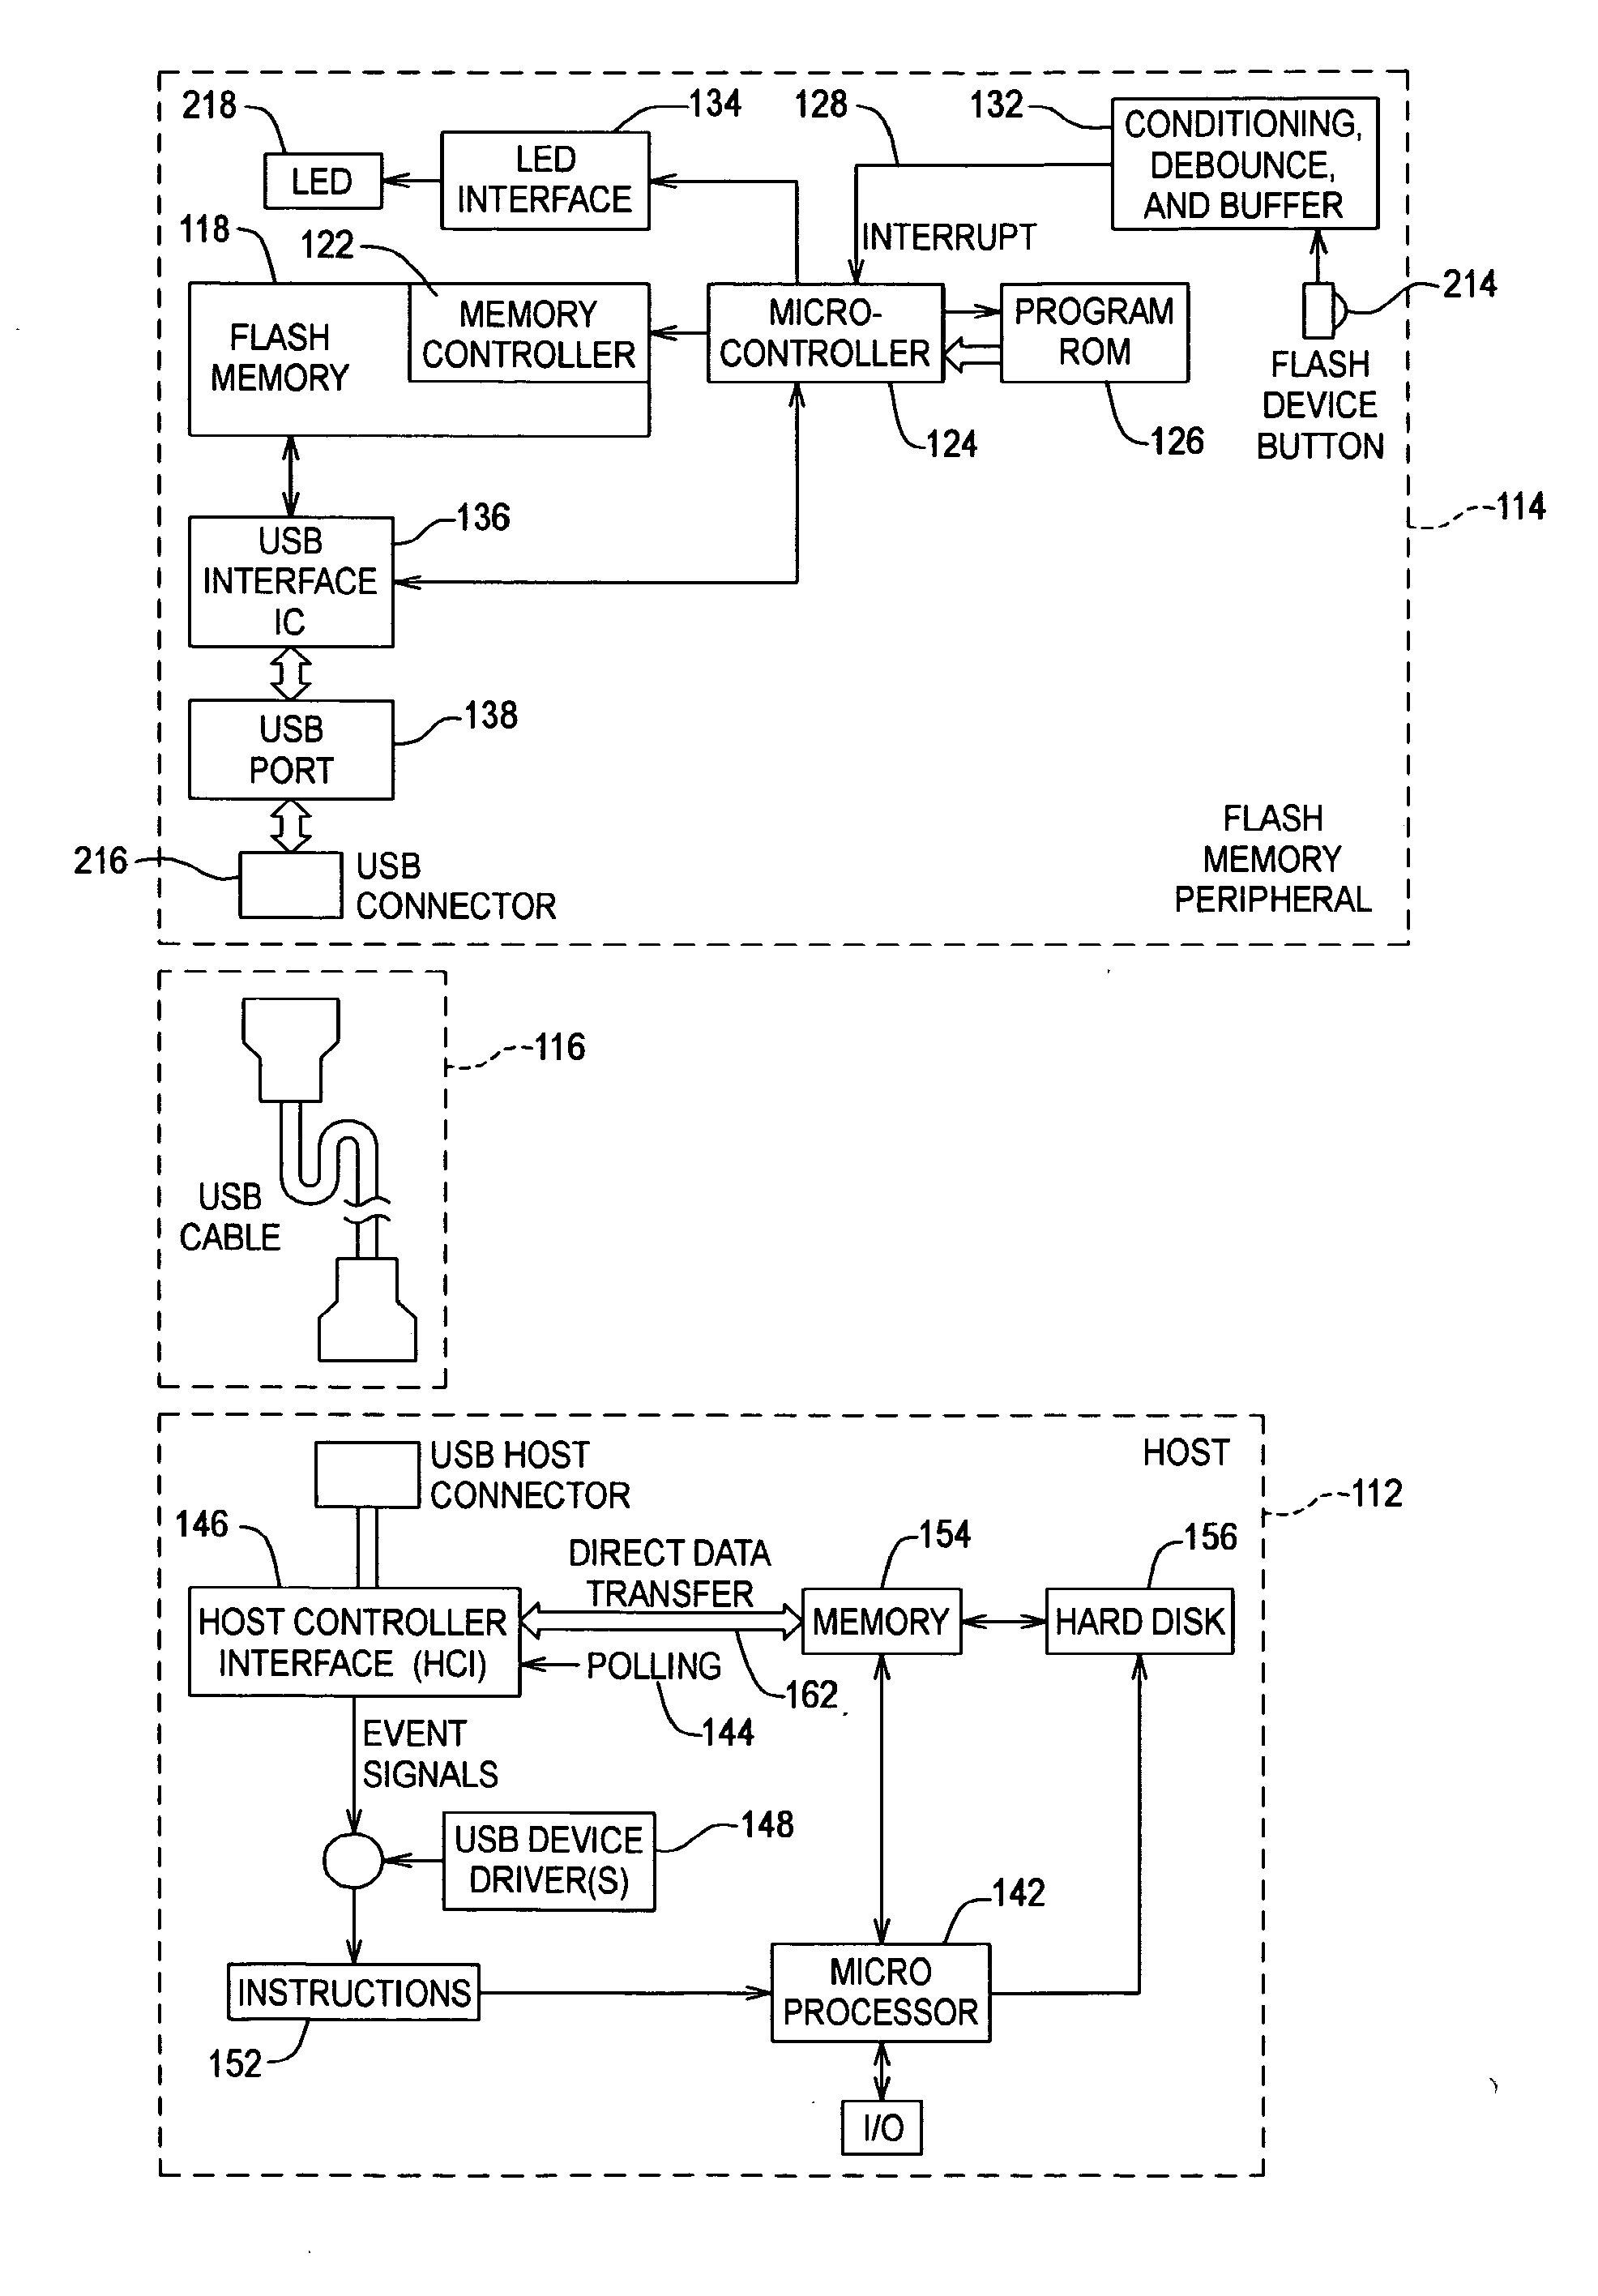 Memory method and apparatus with button release